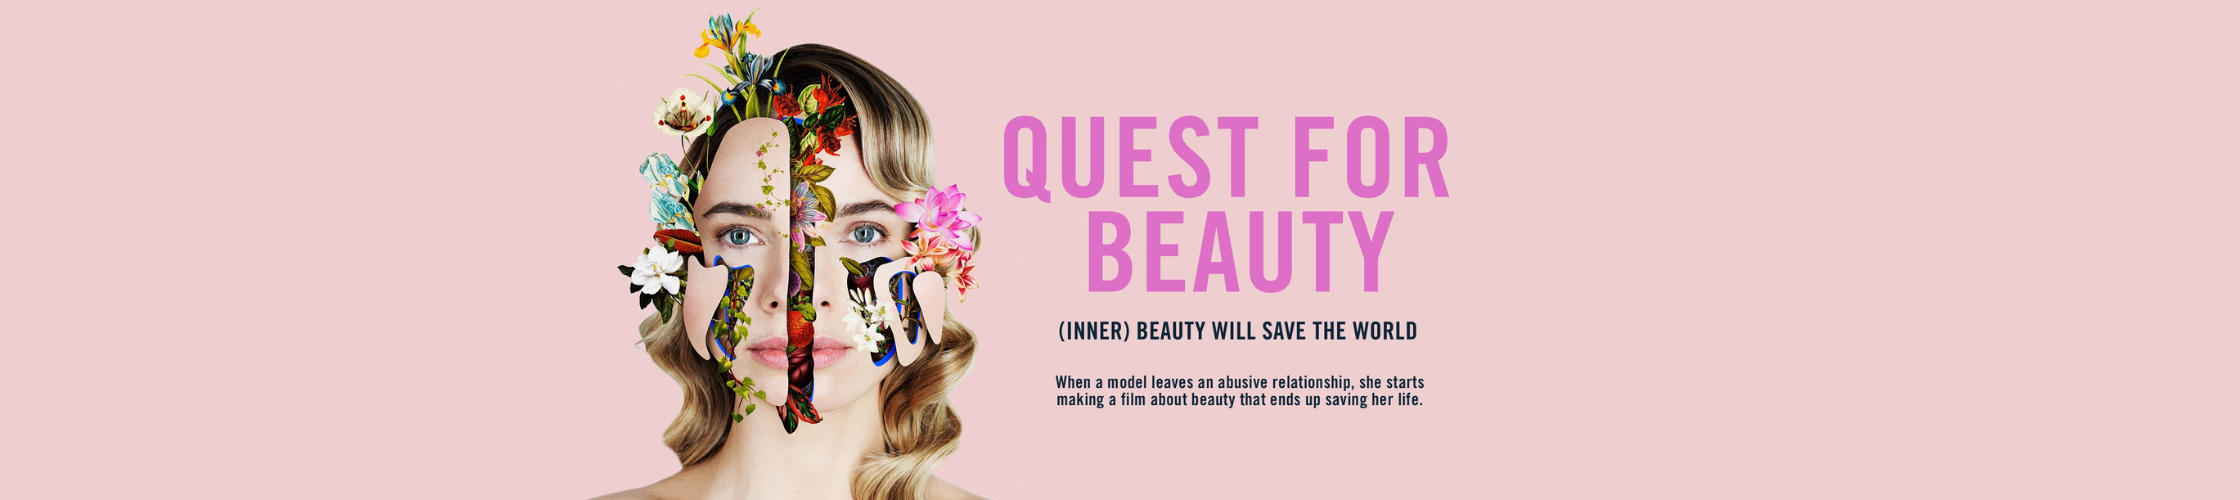 Image for Quest For Beauty